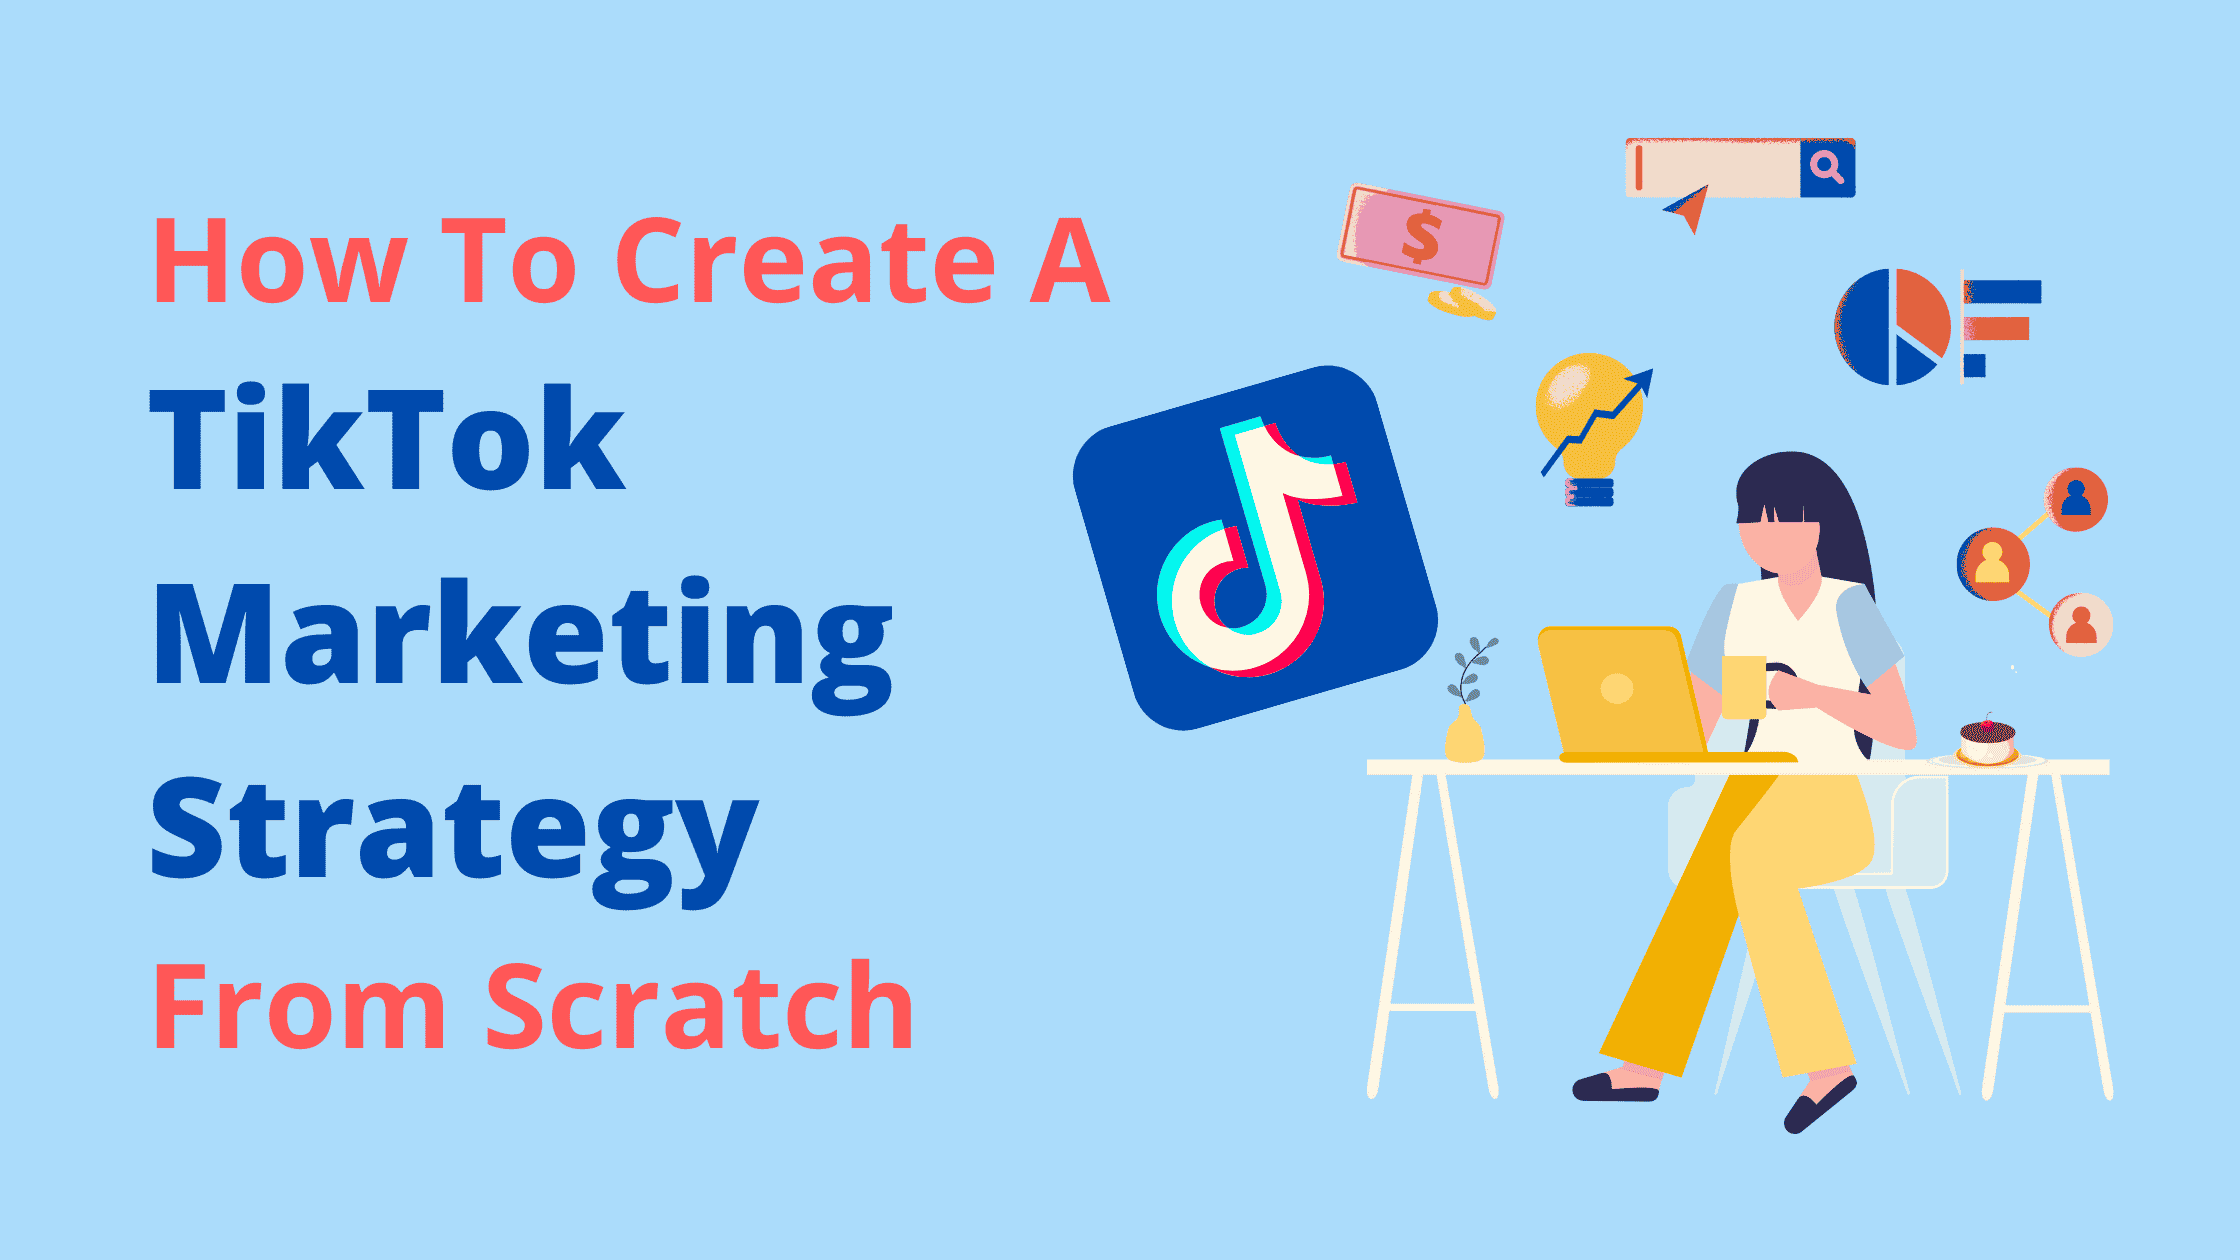 How to Create a TikTok Marketing Strategy From Scratch